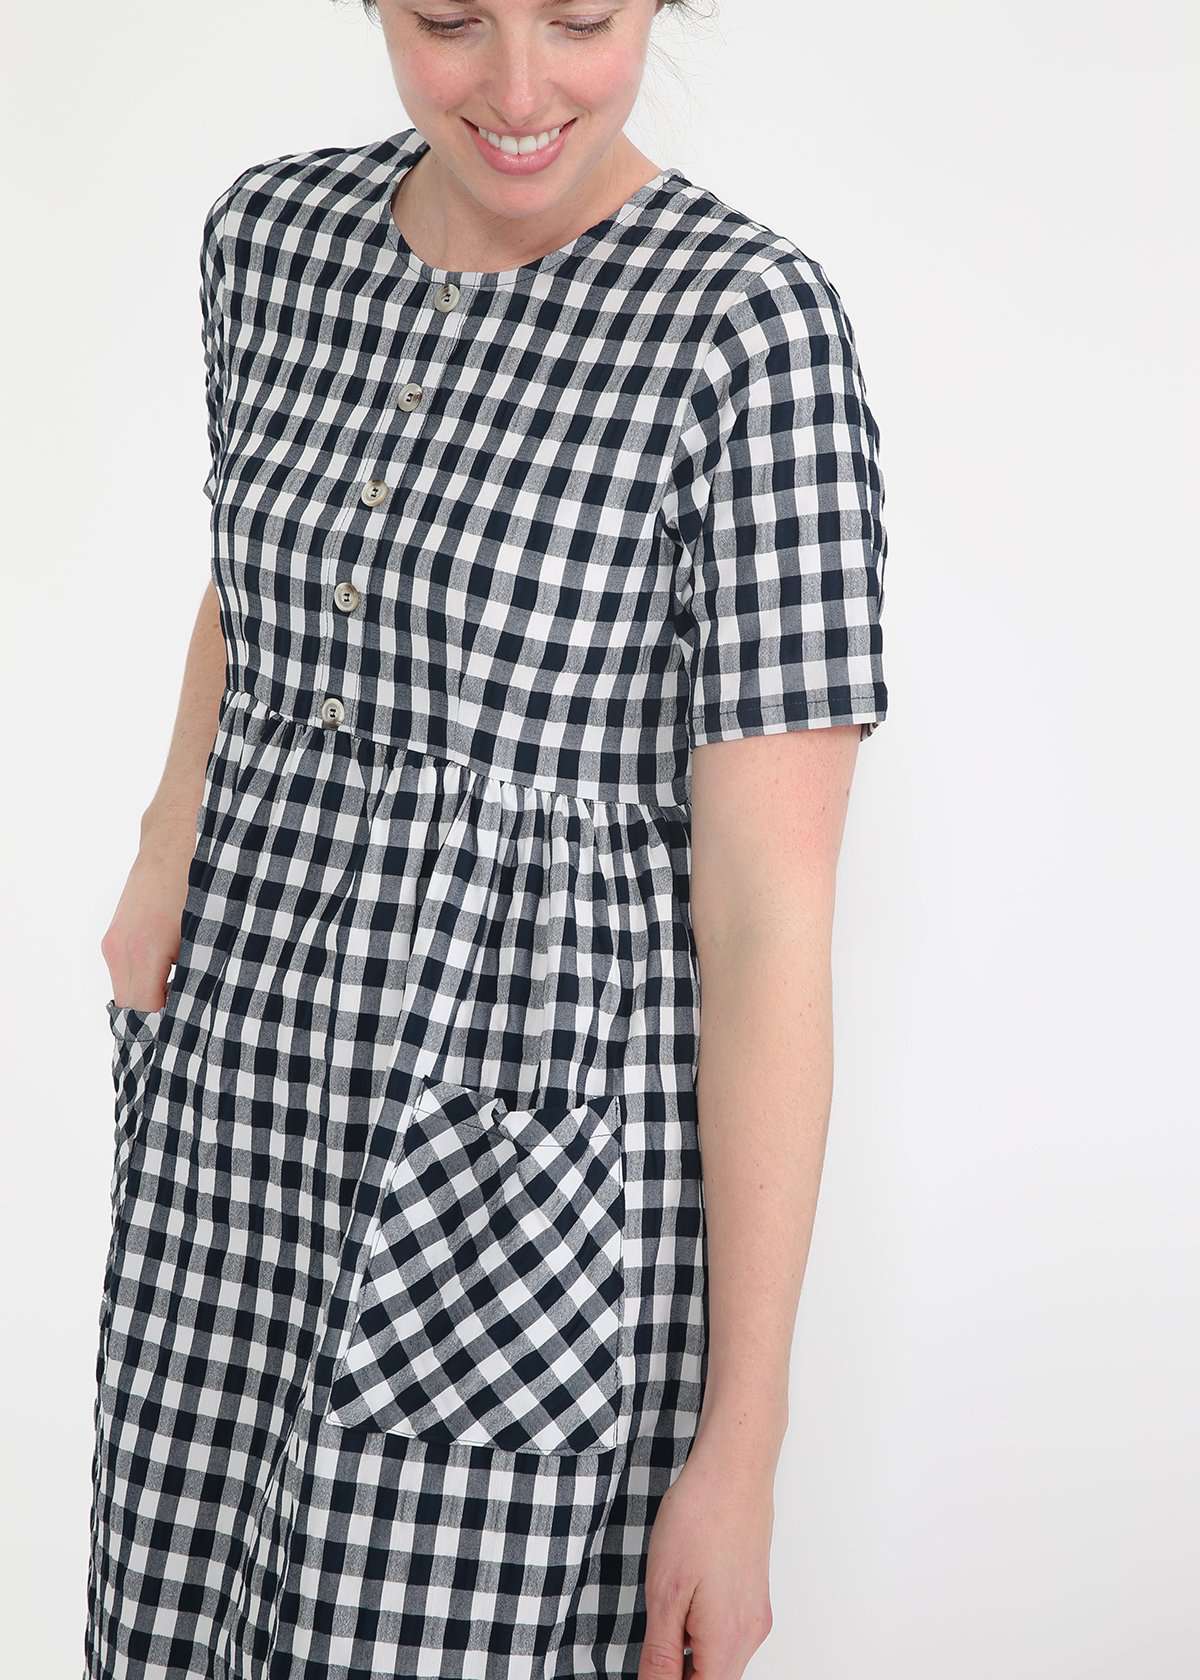 woman wearing a navy and white gingham print midi dress